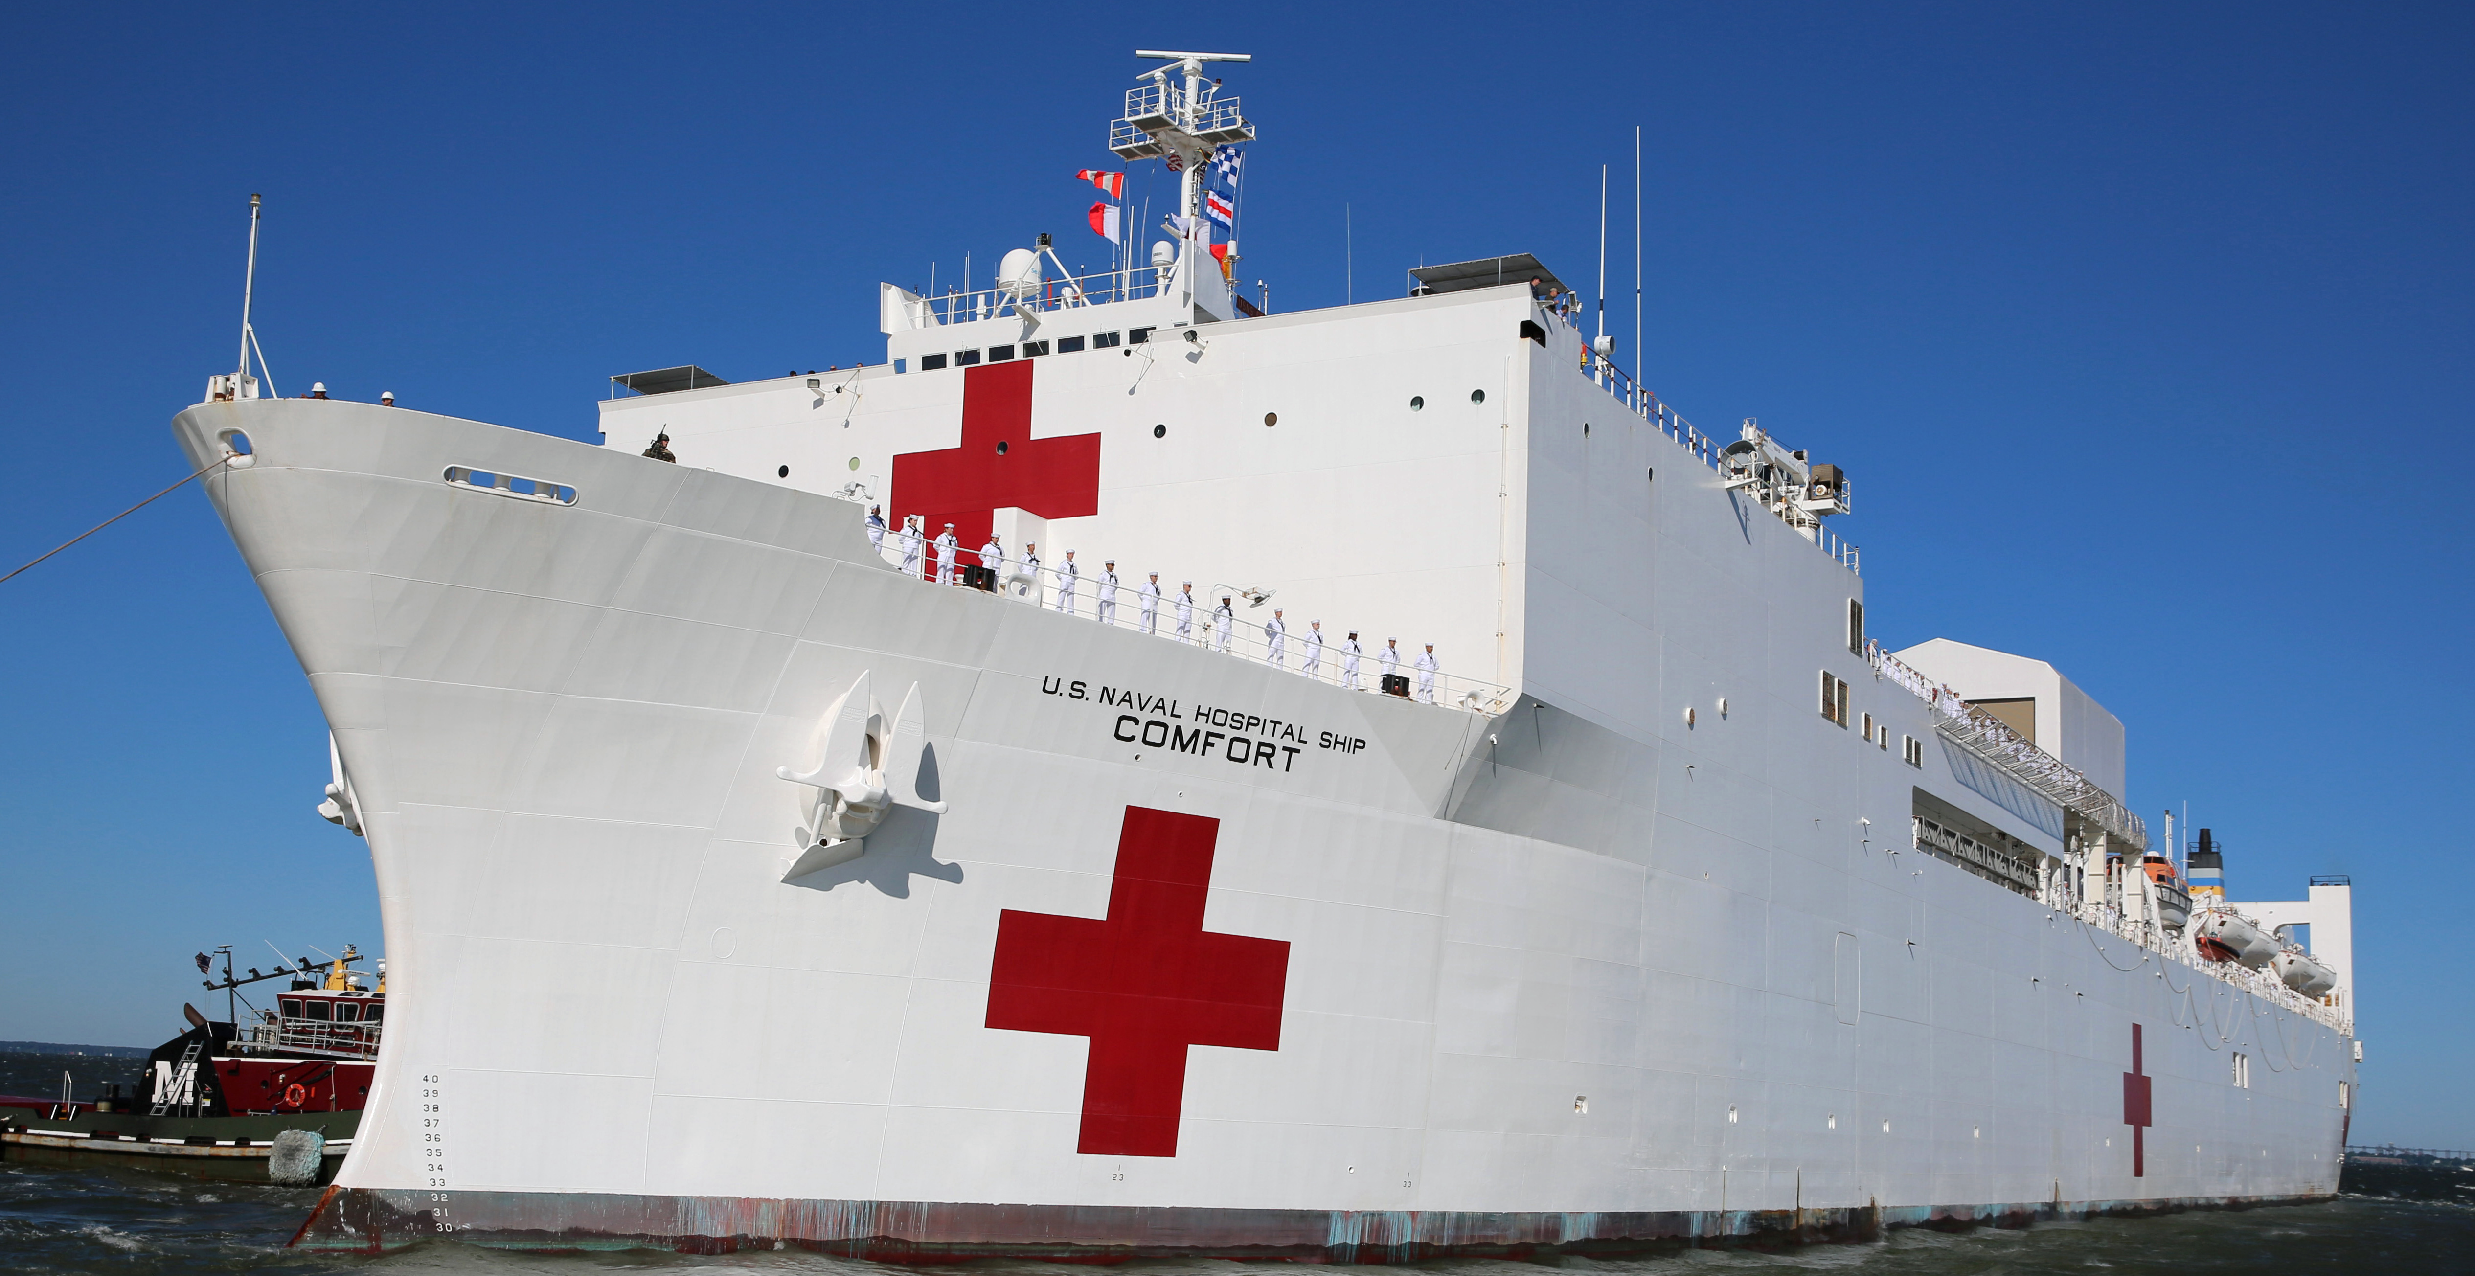 Navy Hospital Ship in New York Only Has 20 Patients But 1,000 Bed Capacity